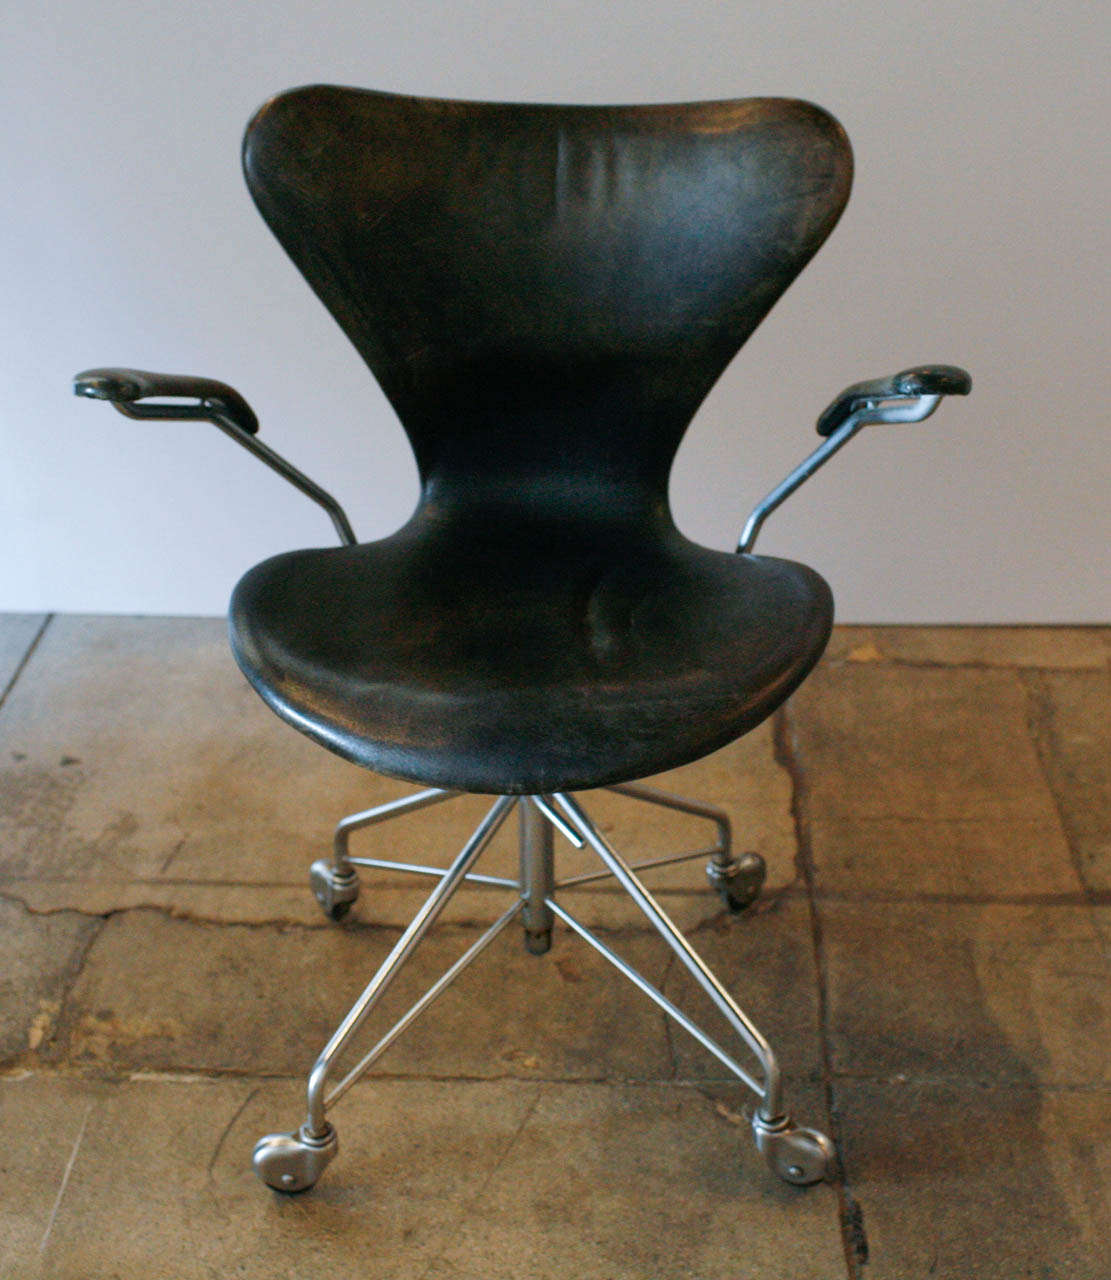 a nice series seven chair by arne jacobsen , originally designed in 1955 , this one is from the early 1960's. stamped & produced by fritz hansen.